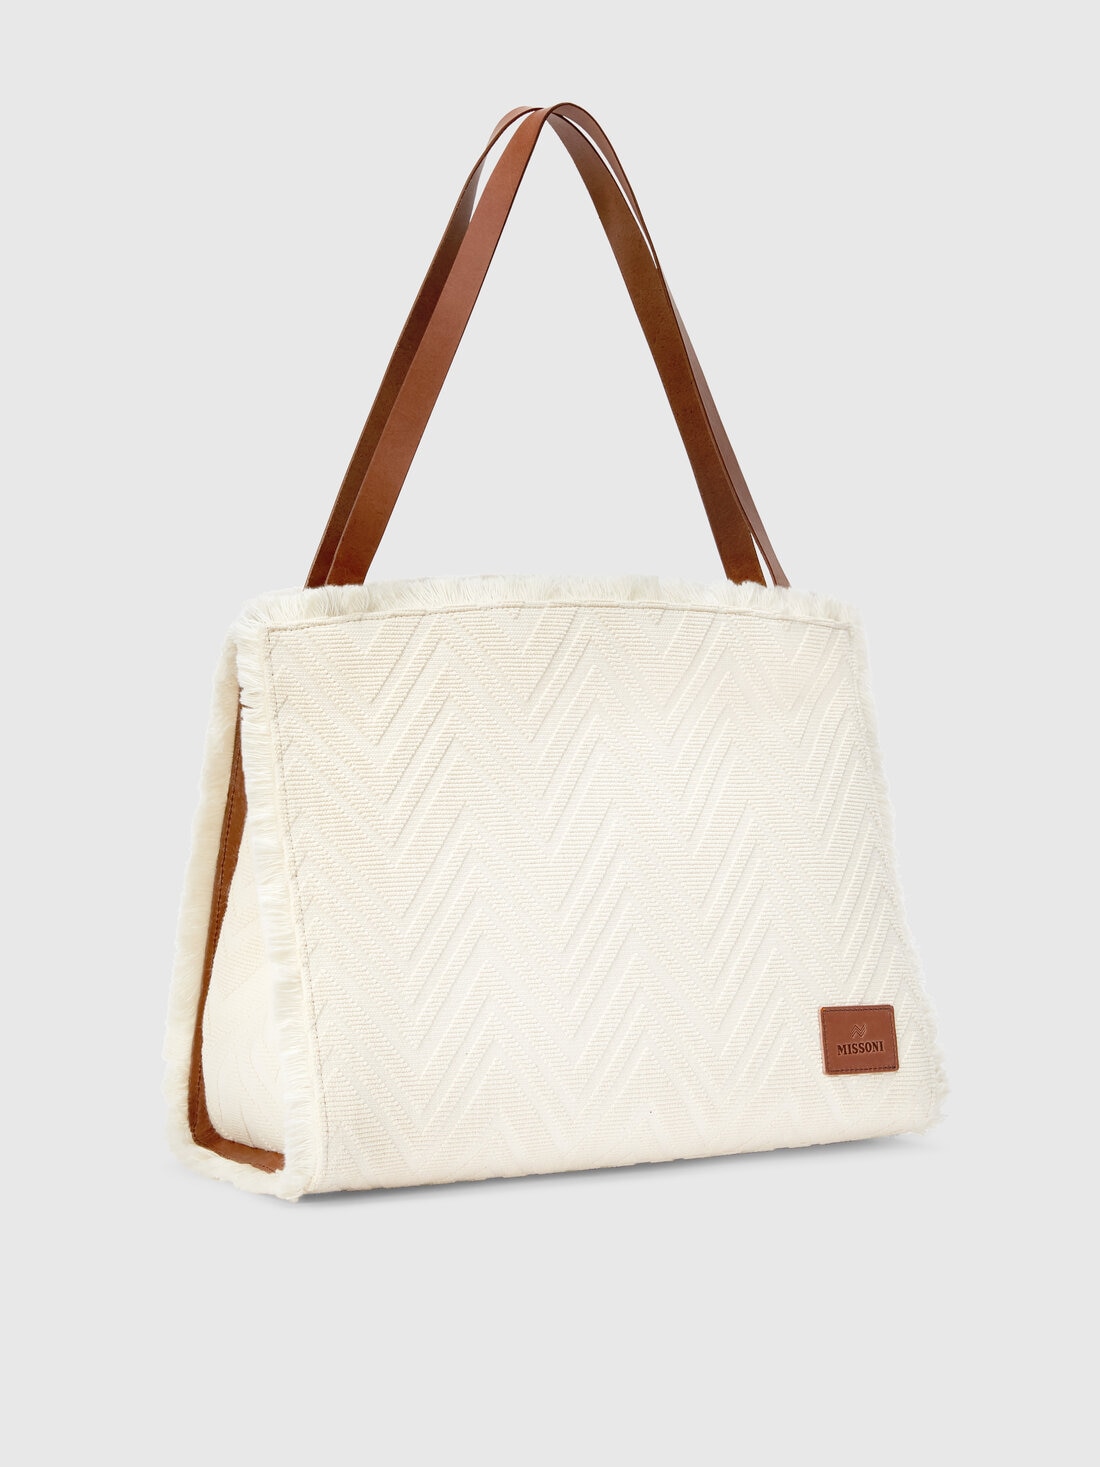 Tote bag in cotton blend with chevron pattern, Brown - 8053147143231 - 1